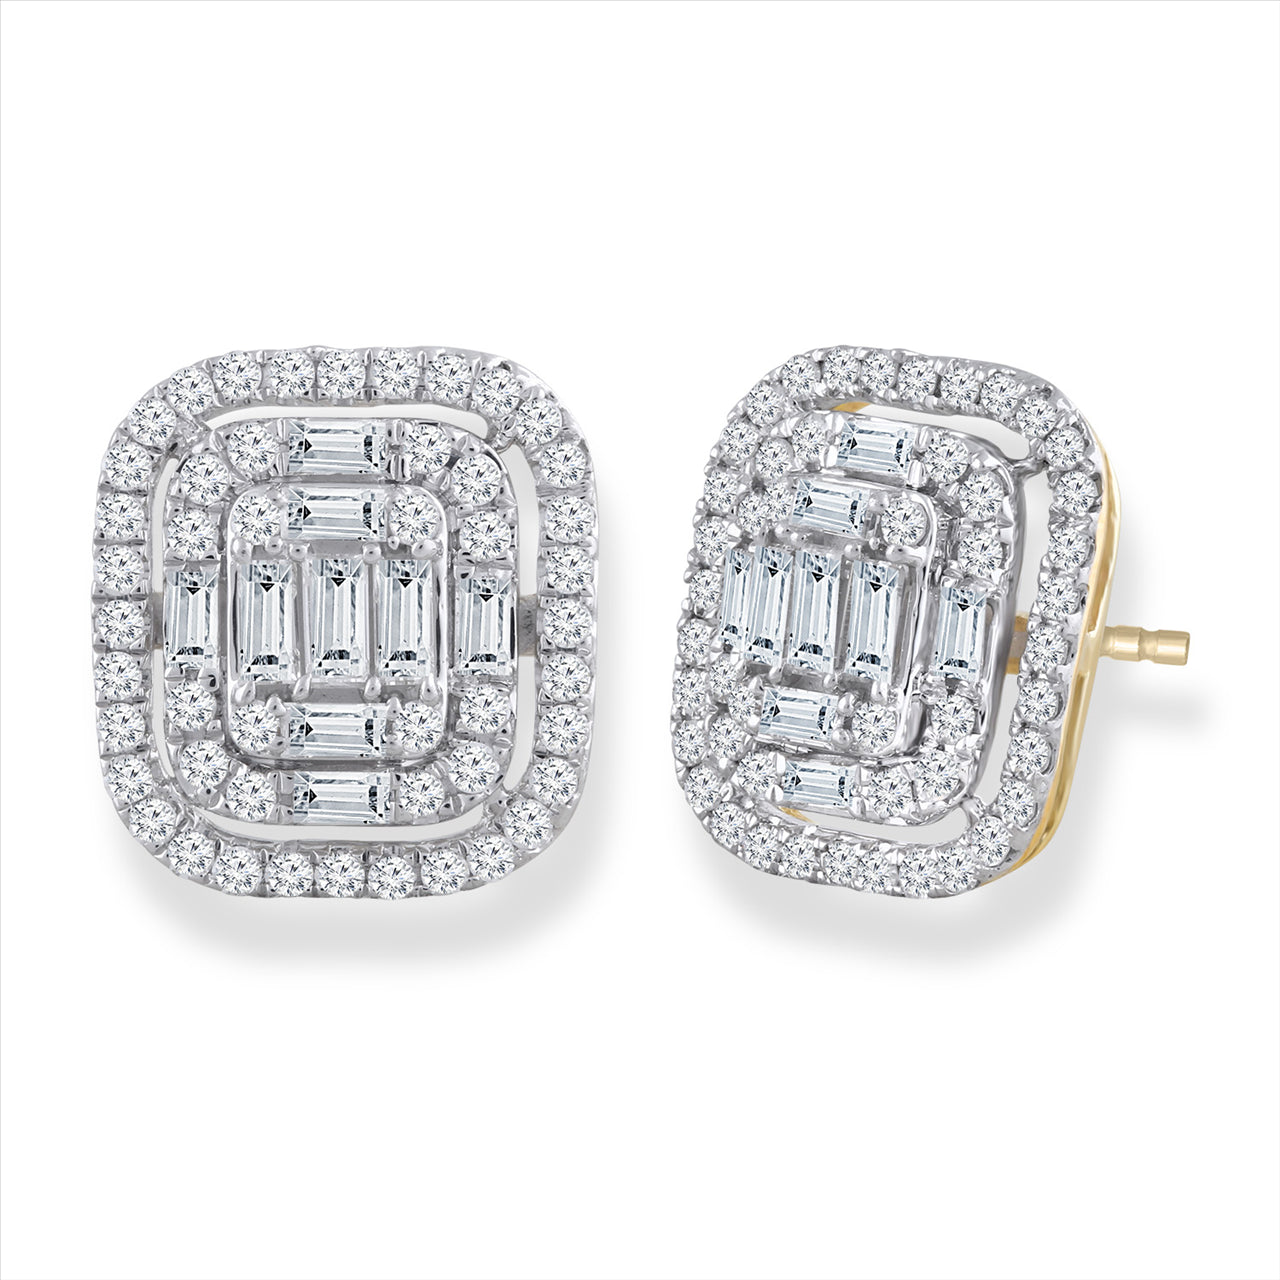 1ct White Gold Round And Baguette Diamond Stud Earrings